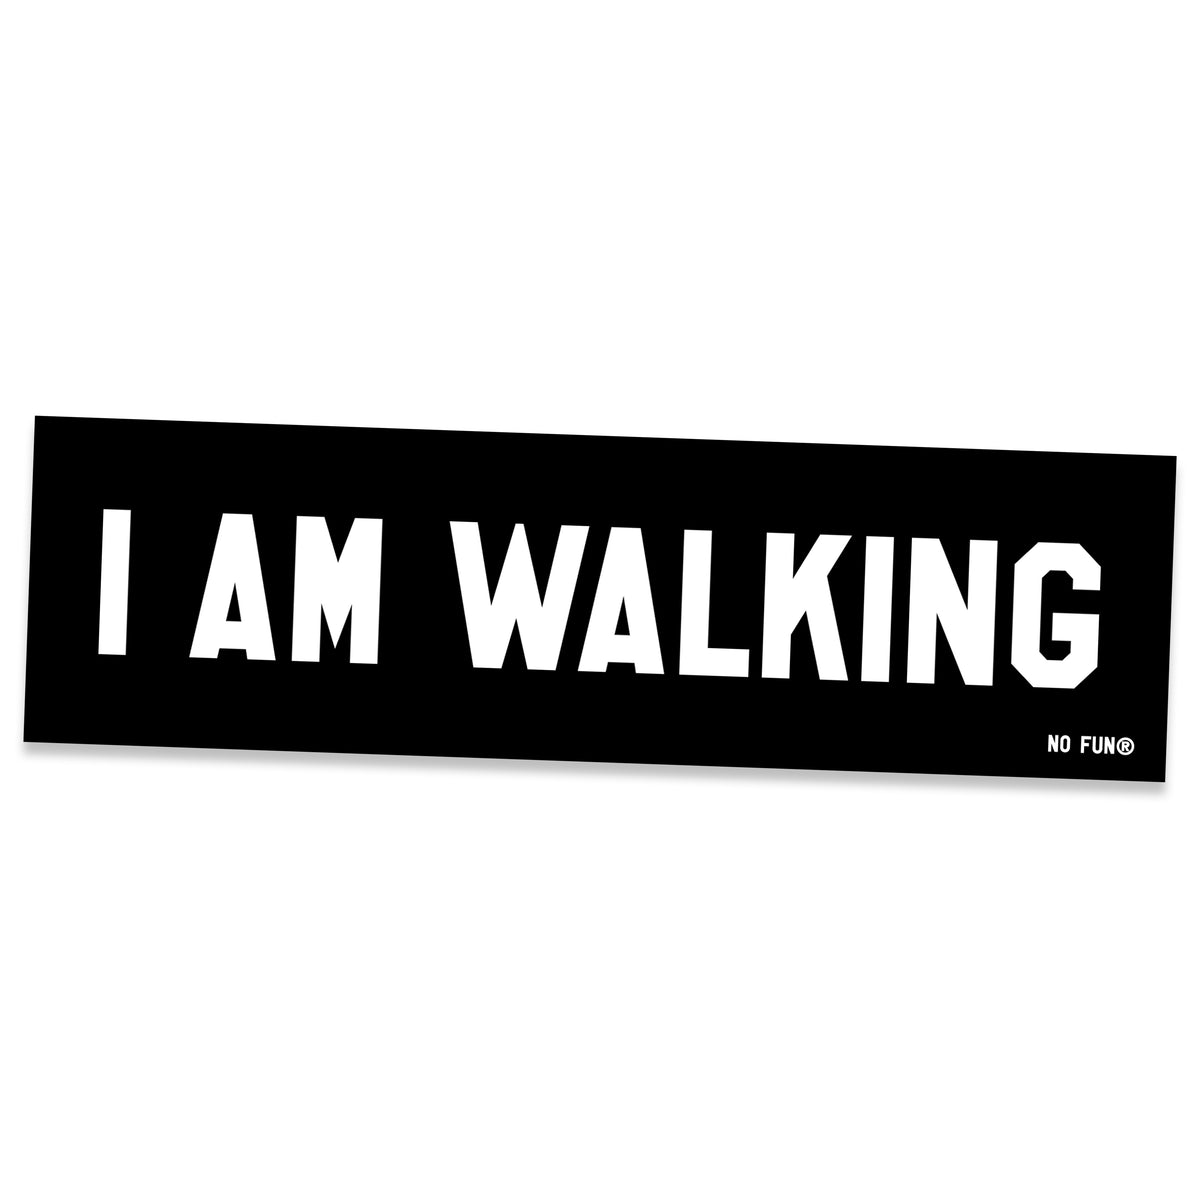 The "I Am Walking" bumper sticker by No Fun®.  Sticker is black, and the phrase "I Am Walking" is printed in white.  There is a small "No Fun" logo in the bottom right hand corner of the product.